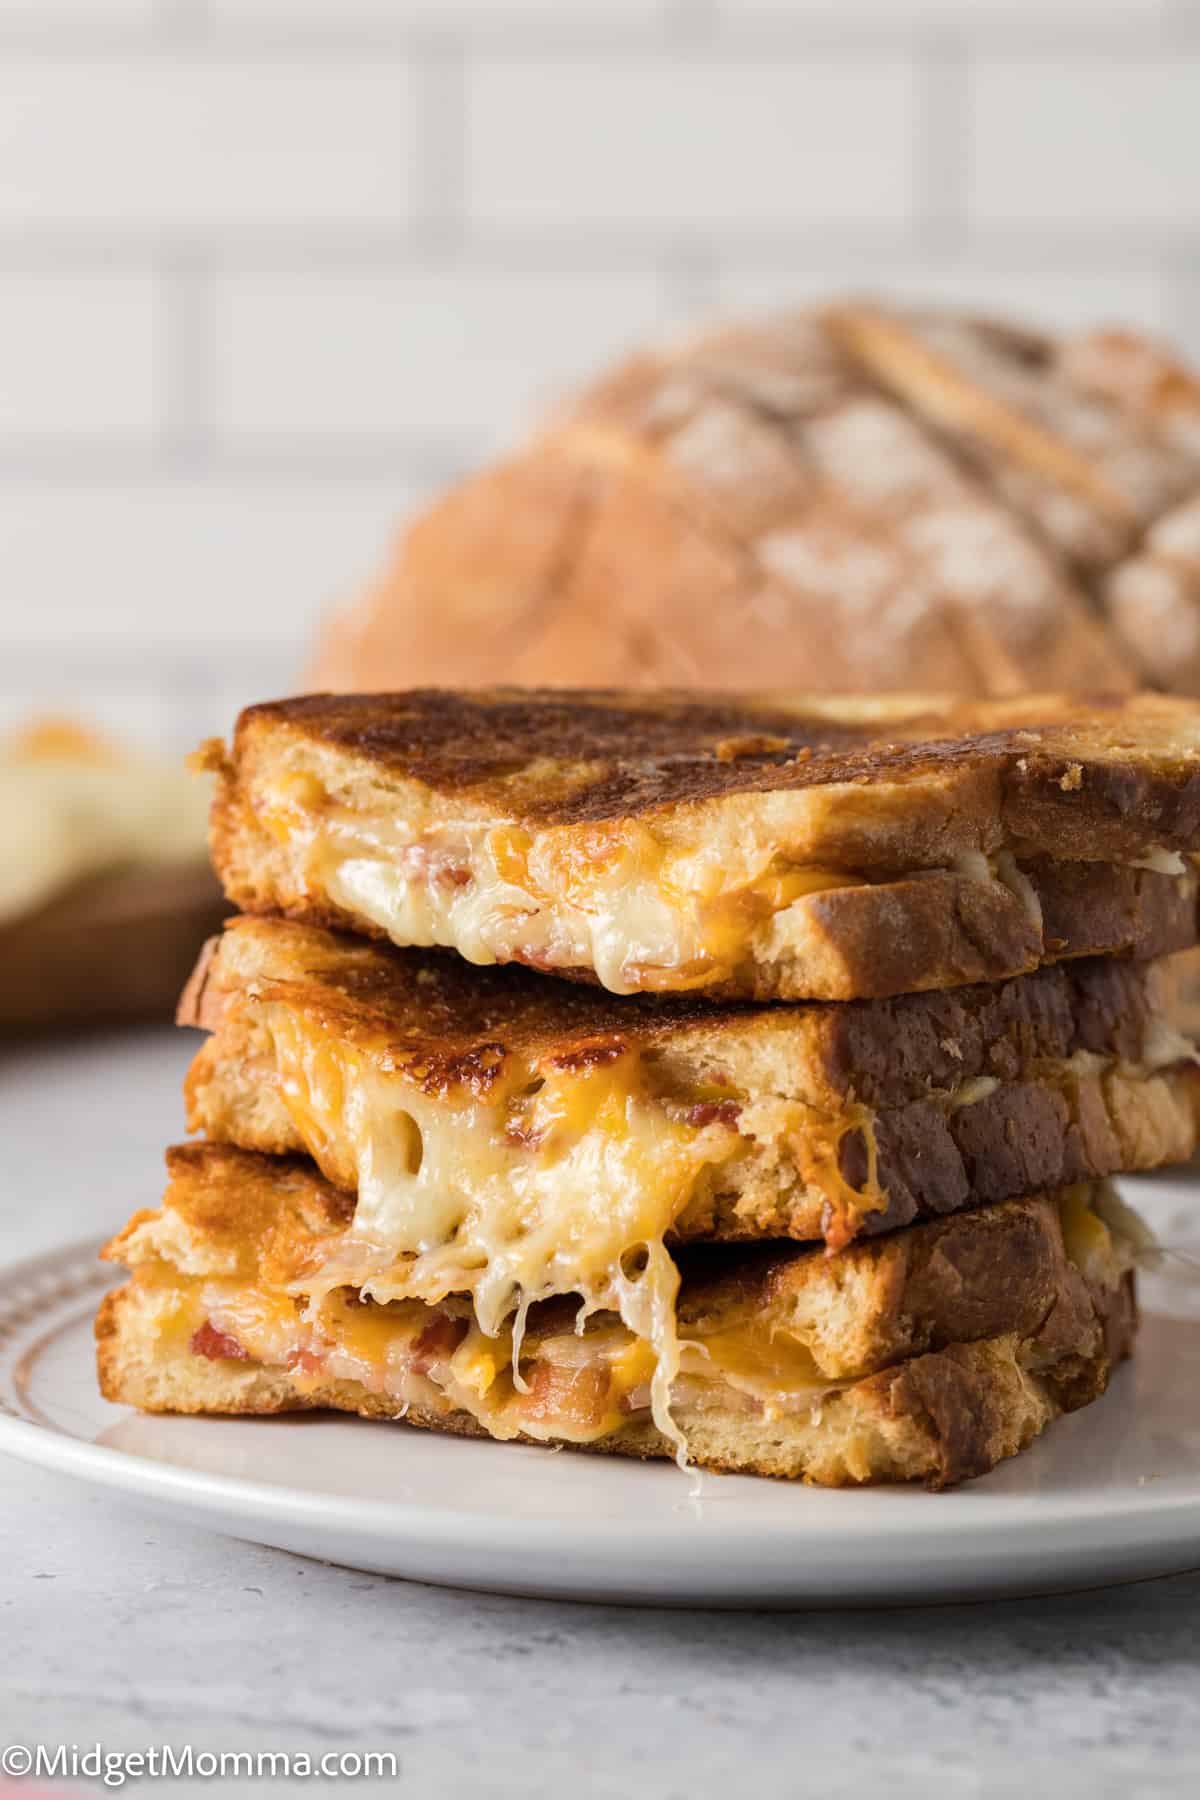 Bacon Grilled Cheese Sandwich Recipe